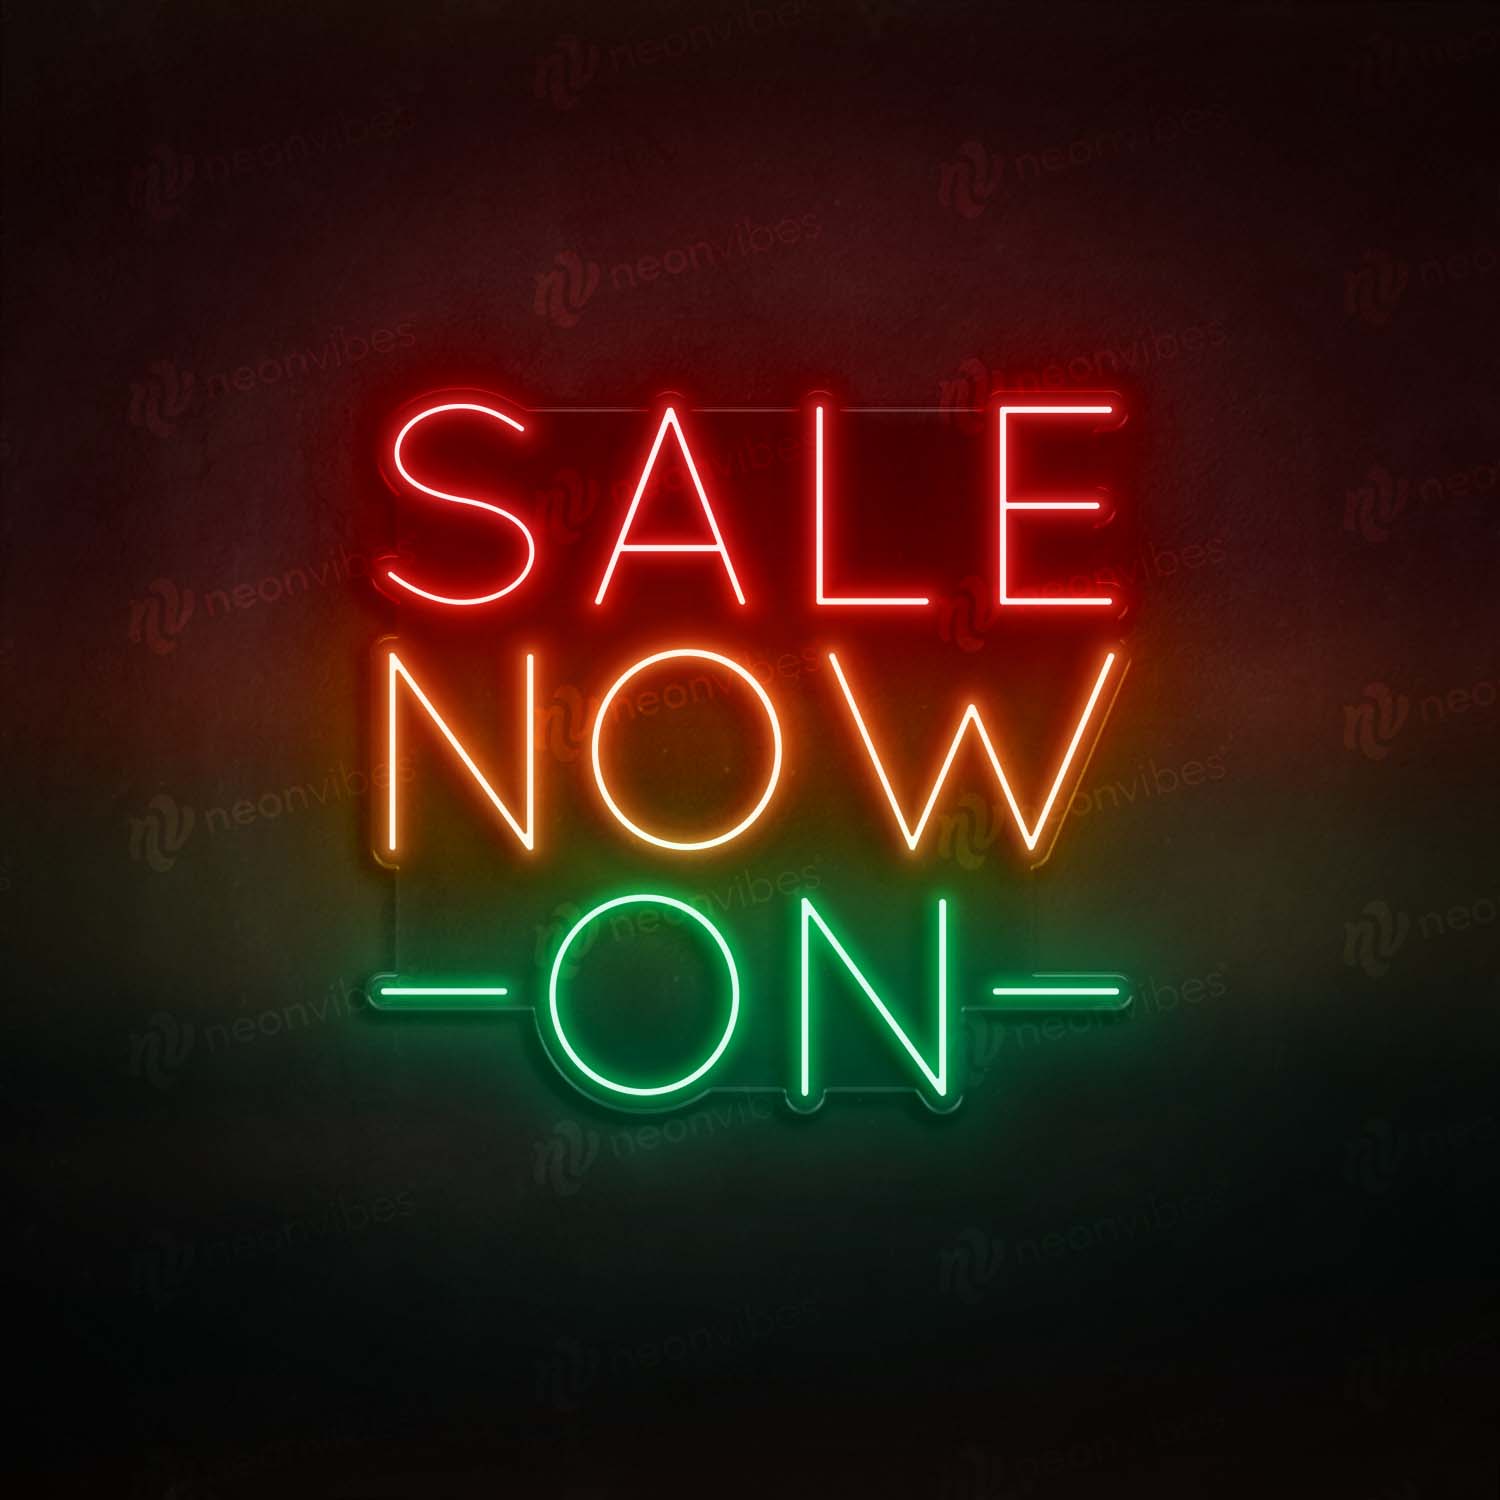 Sale now on neon sign